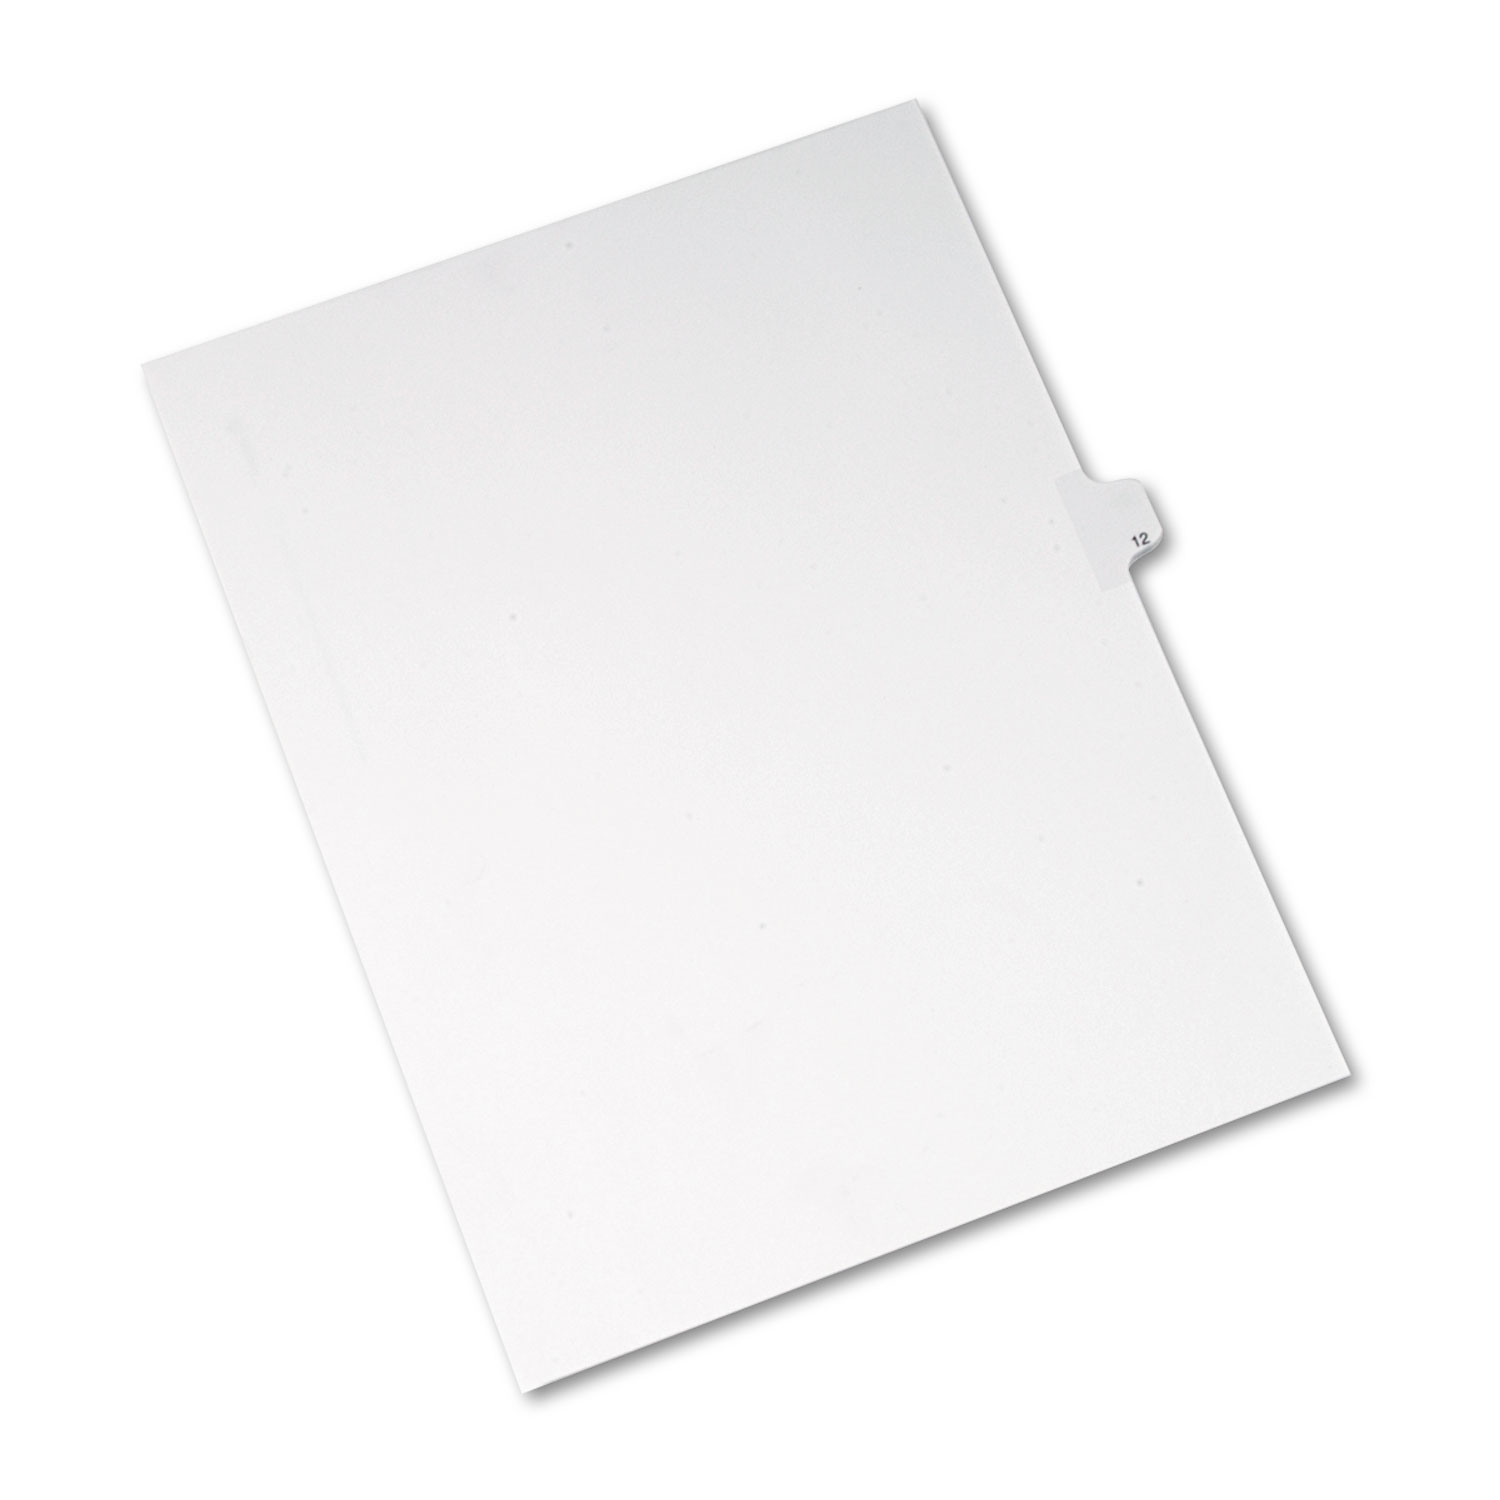 Allstate-Style Legal Exhibit Side Tab Divider, Title: 12, Letter, White, 25/Pack